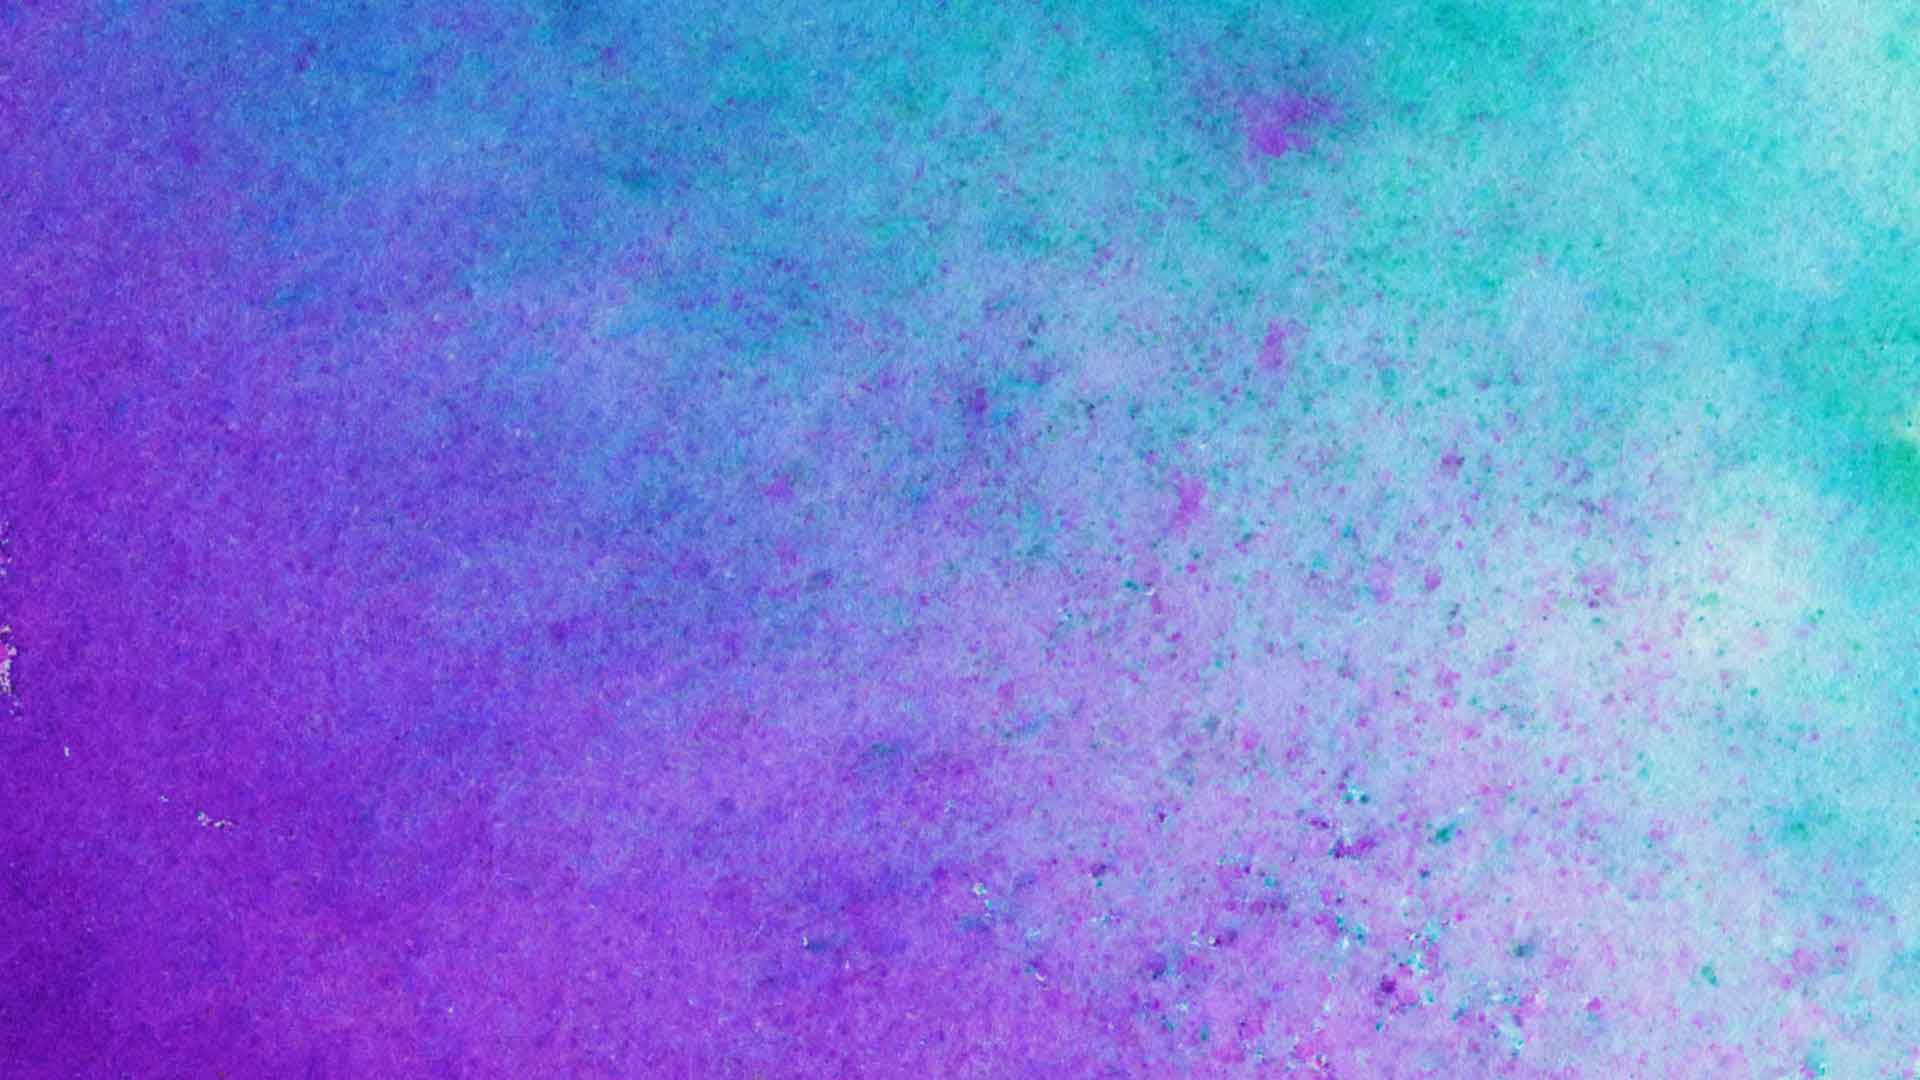 A gradient of purple and teal